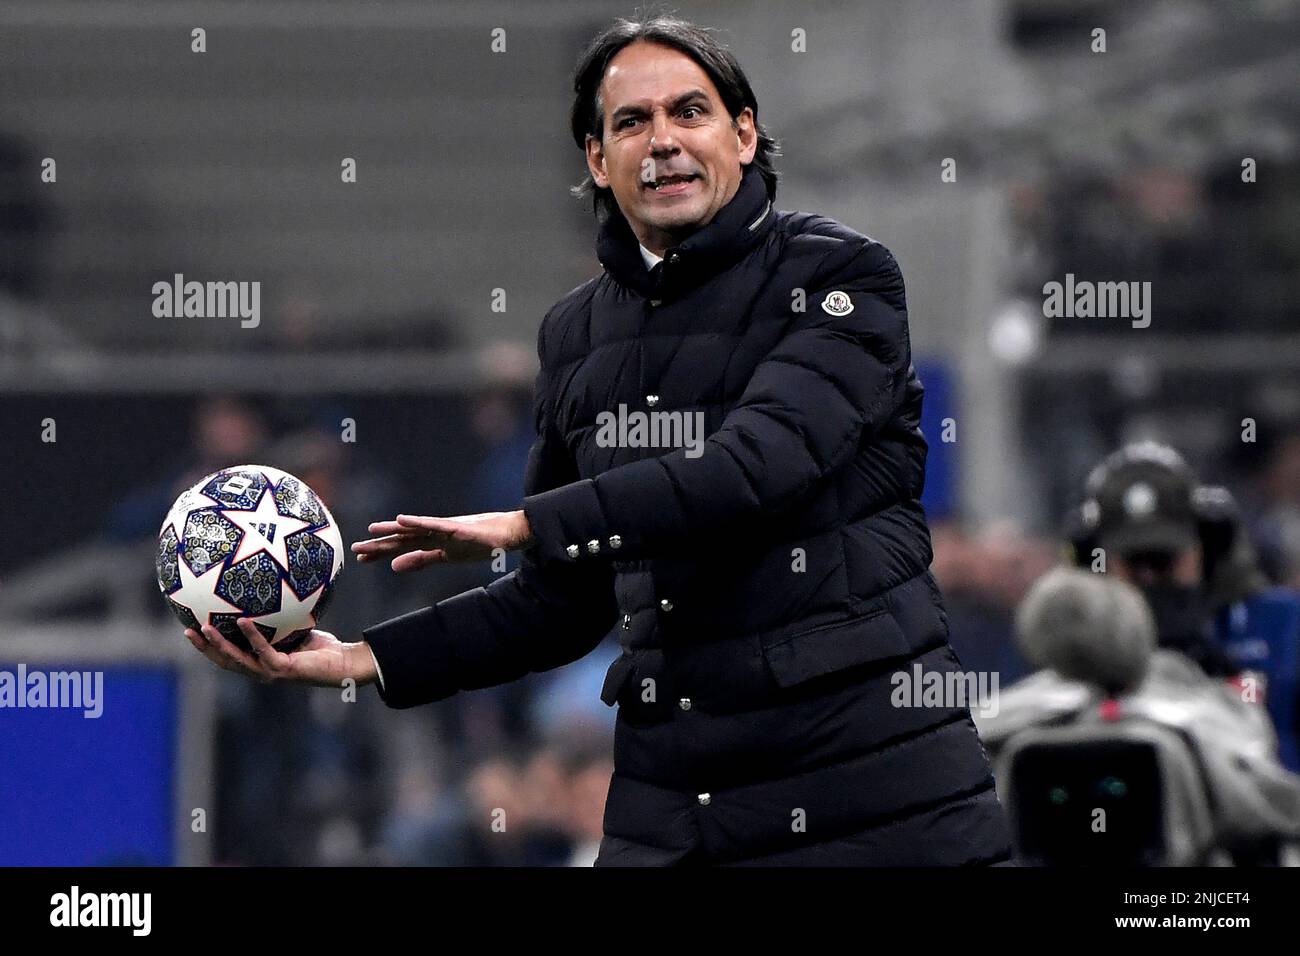 Milano, Italy. 22nd Feb, 2023. Simone Inzaghi head coach of FC  Internazionale during the Champions League football match between FC  Internazionale and FC Porto at San Siro stadium in Milano (Italy), February